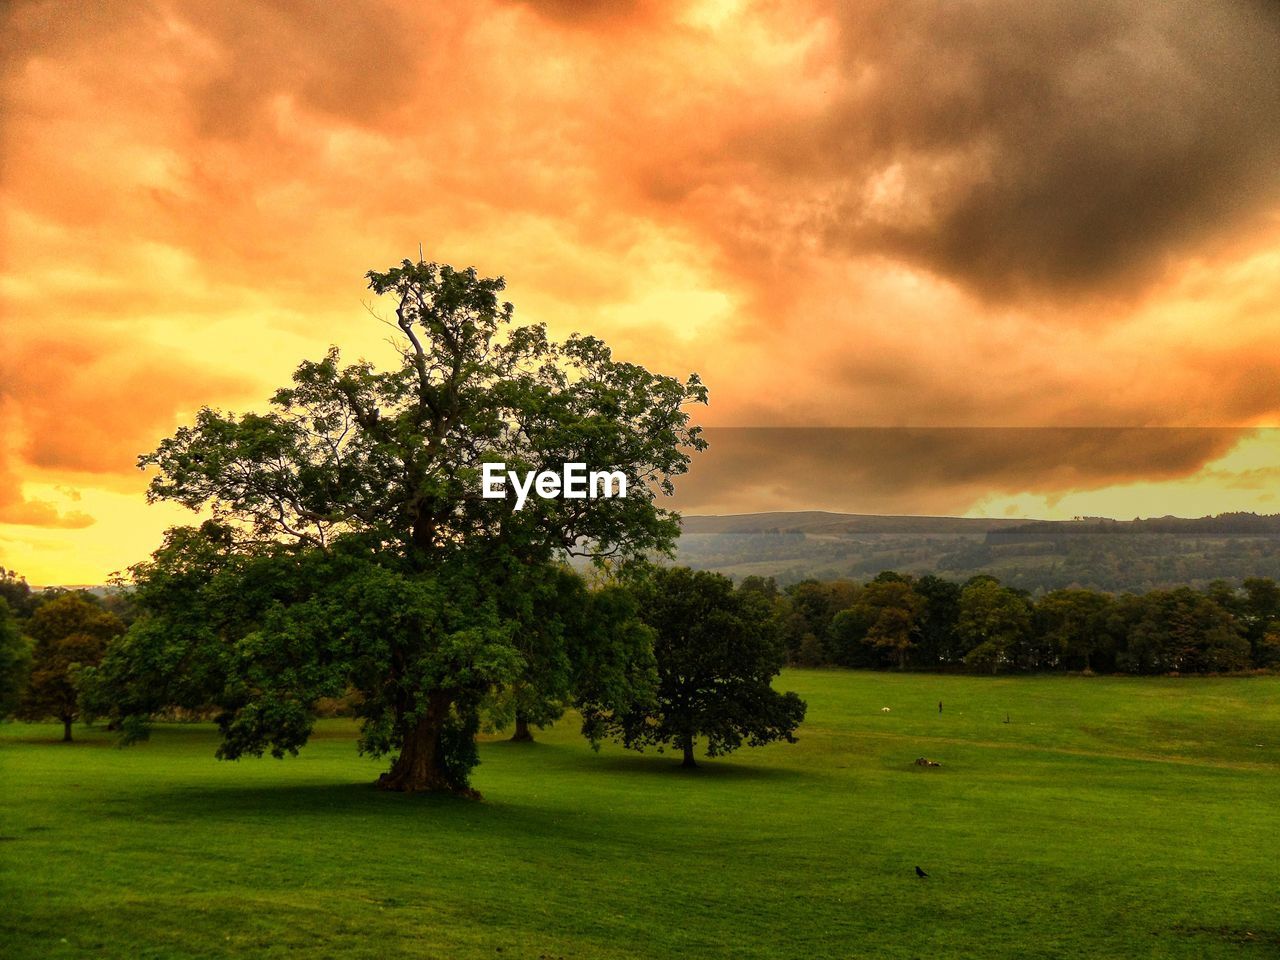 Trees growing on grassy field against cloudy sky during sunset